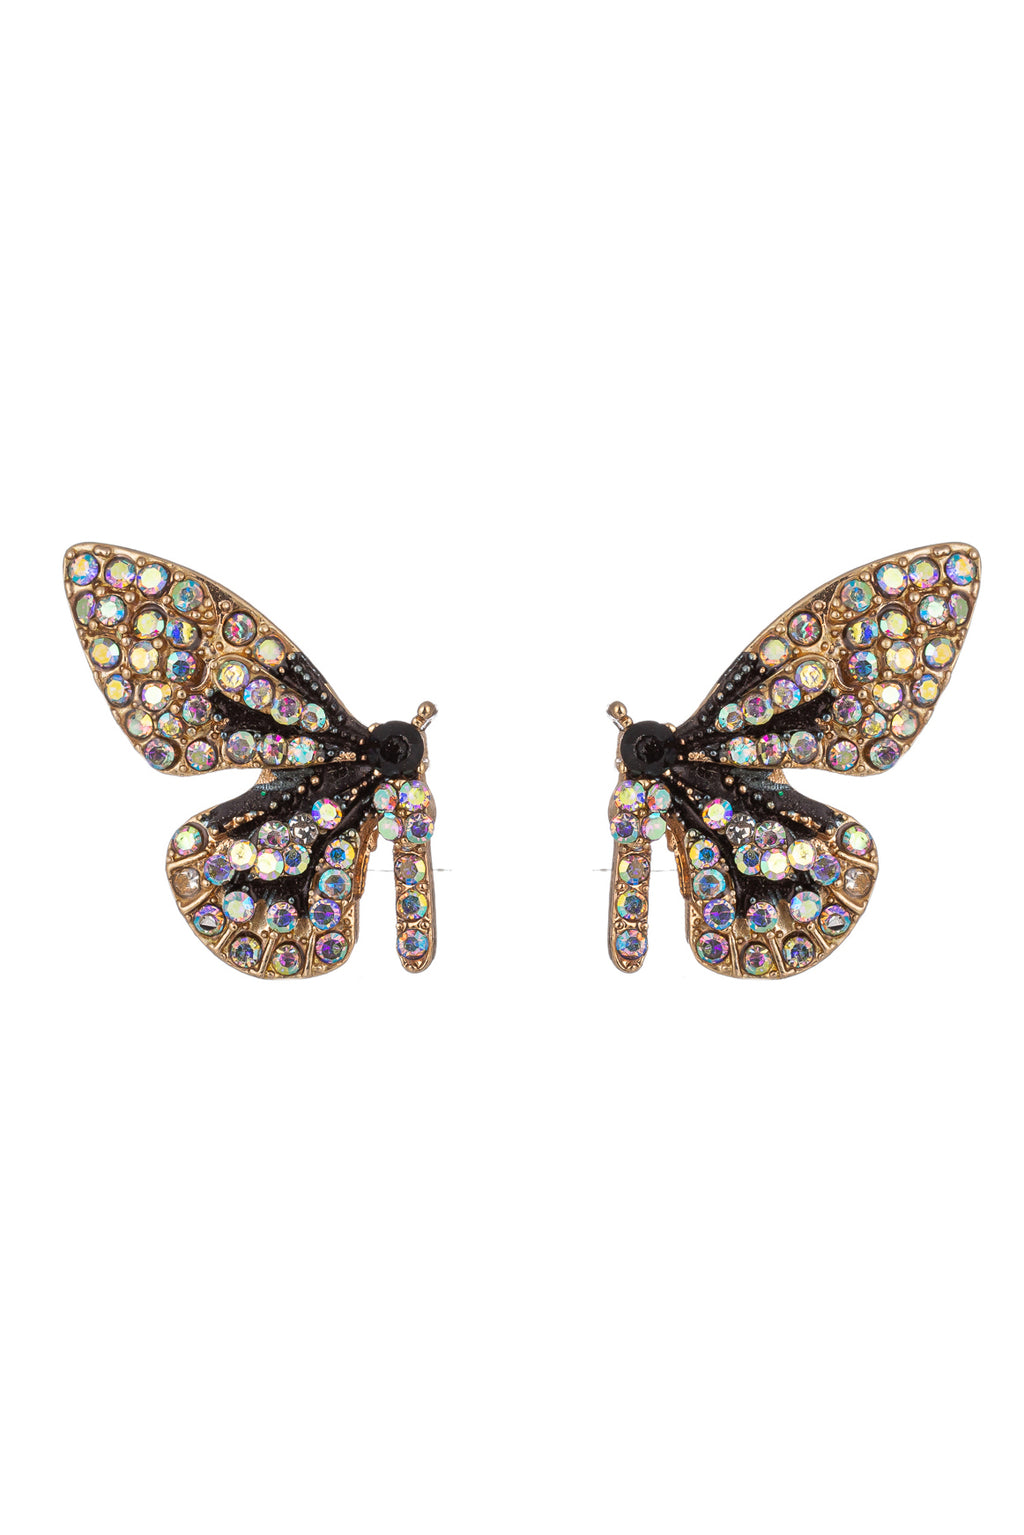 Butterfly wing earrings studded with glass crystals.